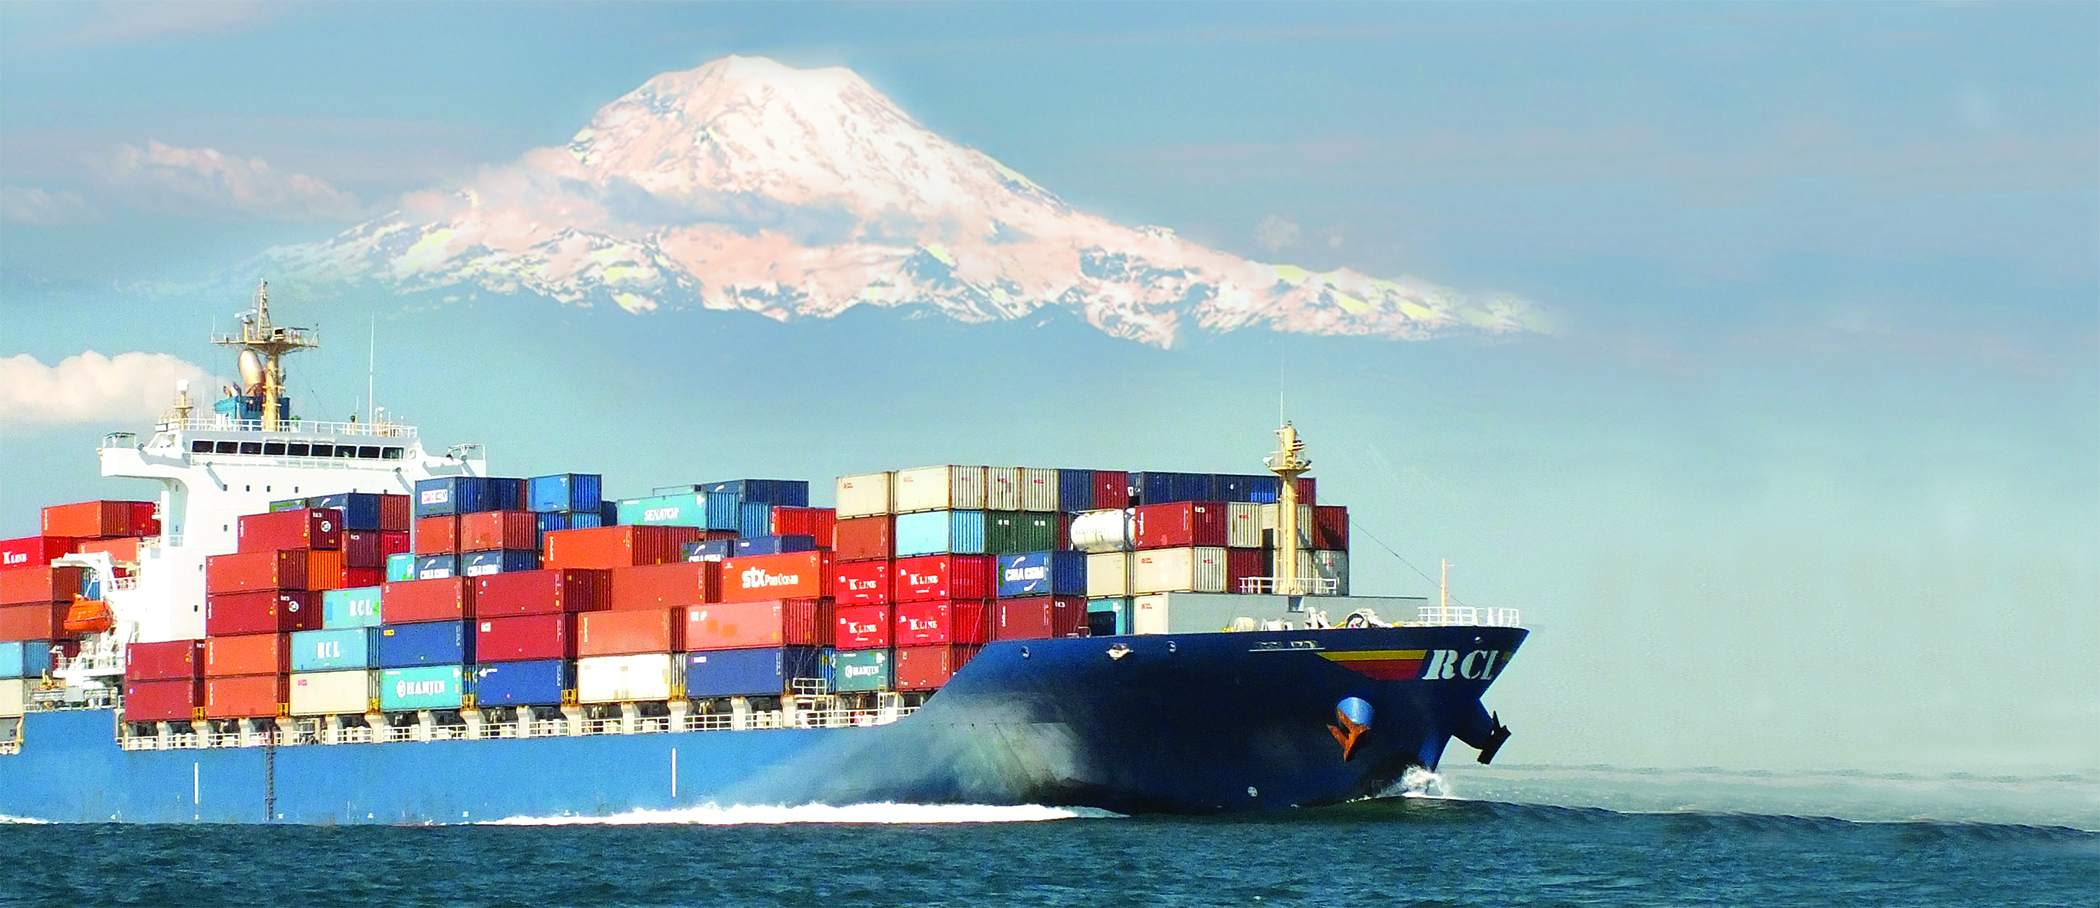 Container ship with Mt. Rainier in the background